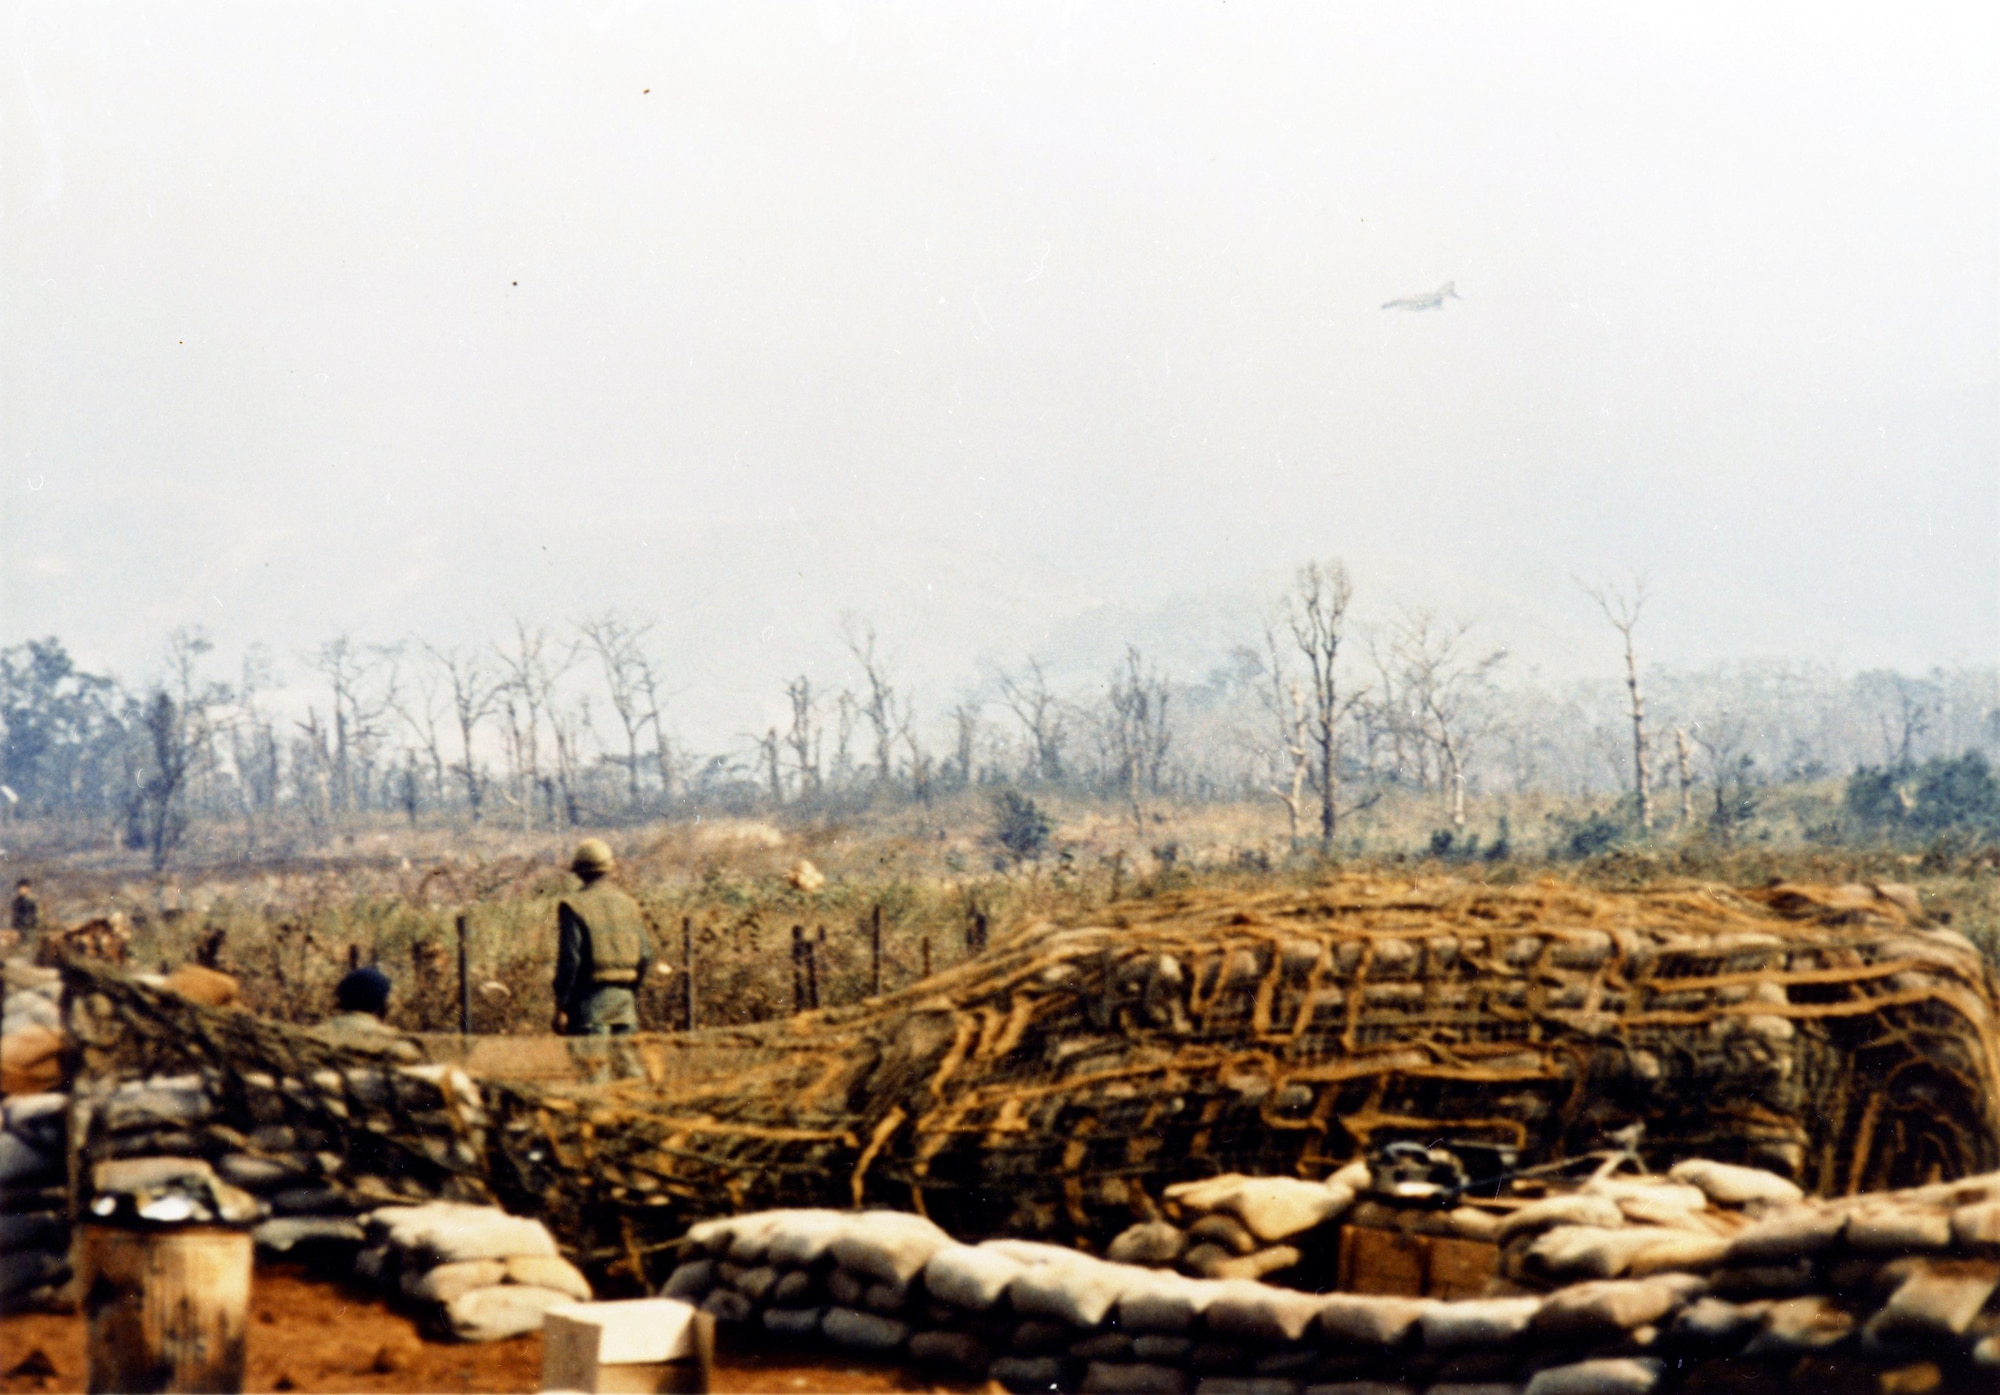 Besieged U.S. Marines at Khe Sanh, Vietnam, watch as a U.S. Air Force F-4 makes close air support strike over the area. (U.S. Air Force photo)